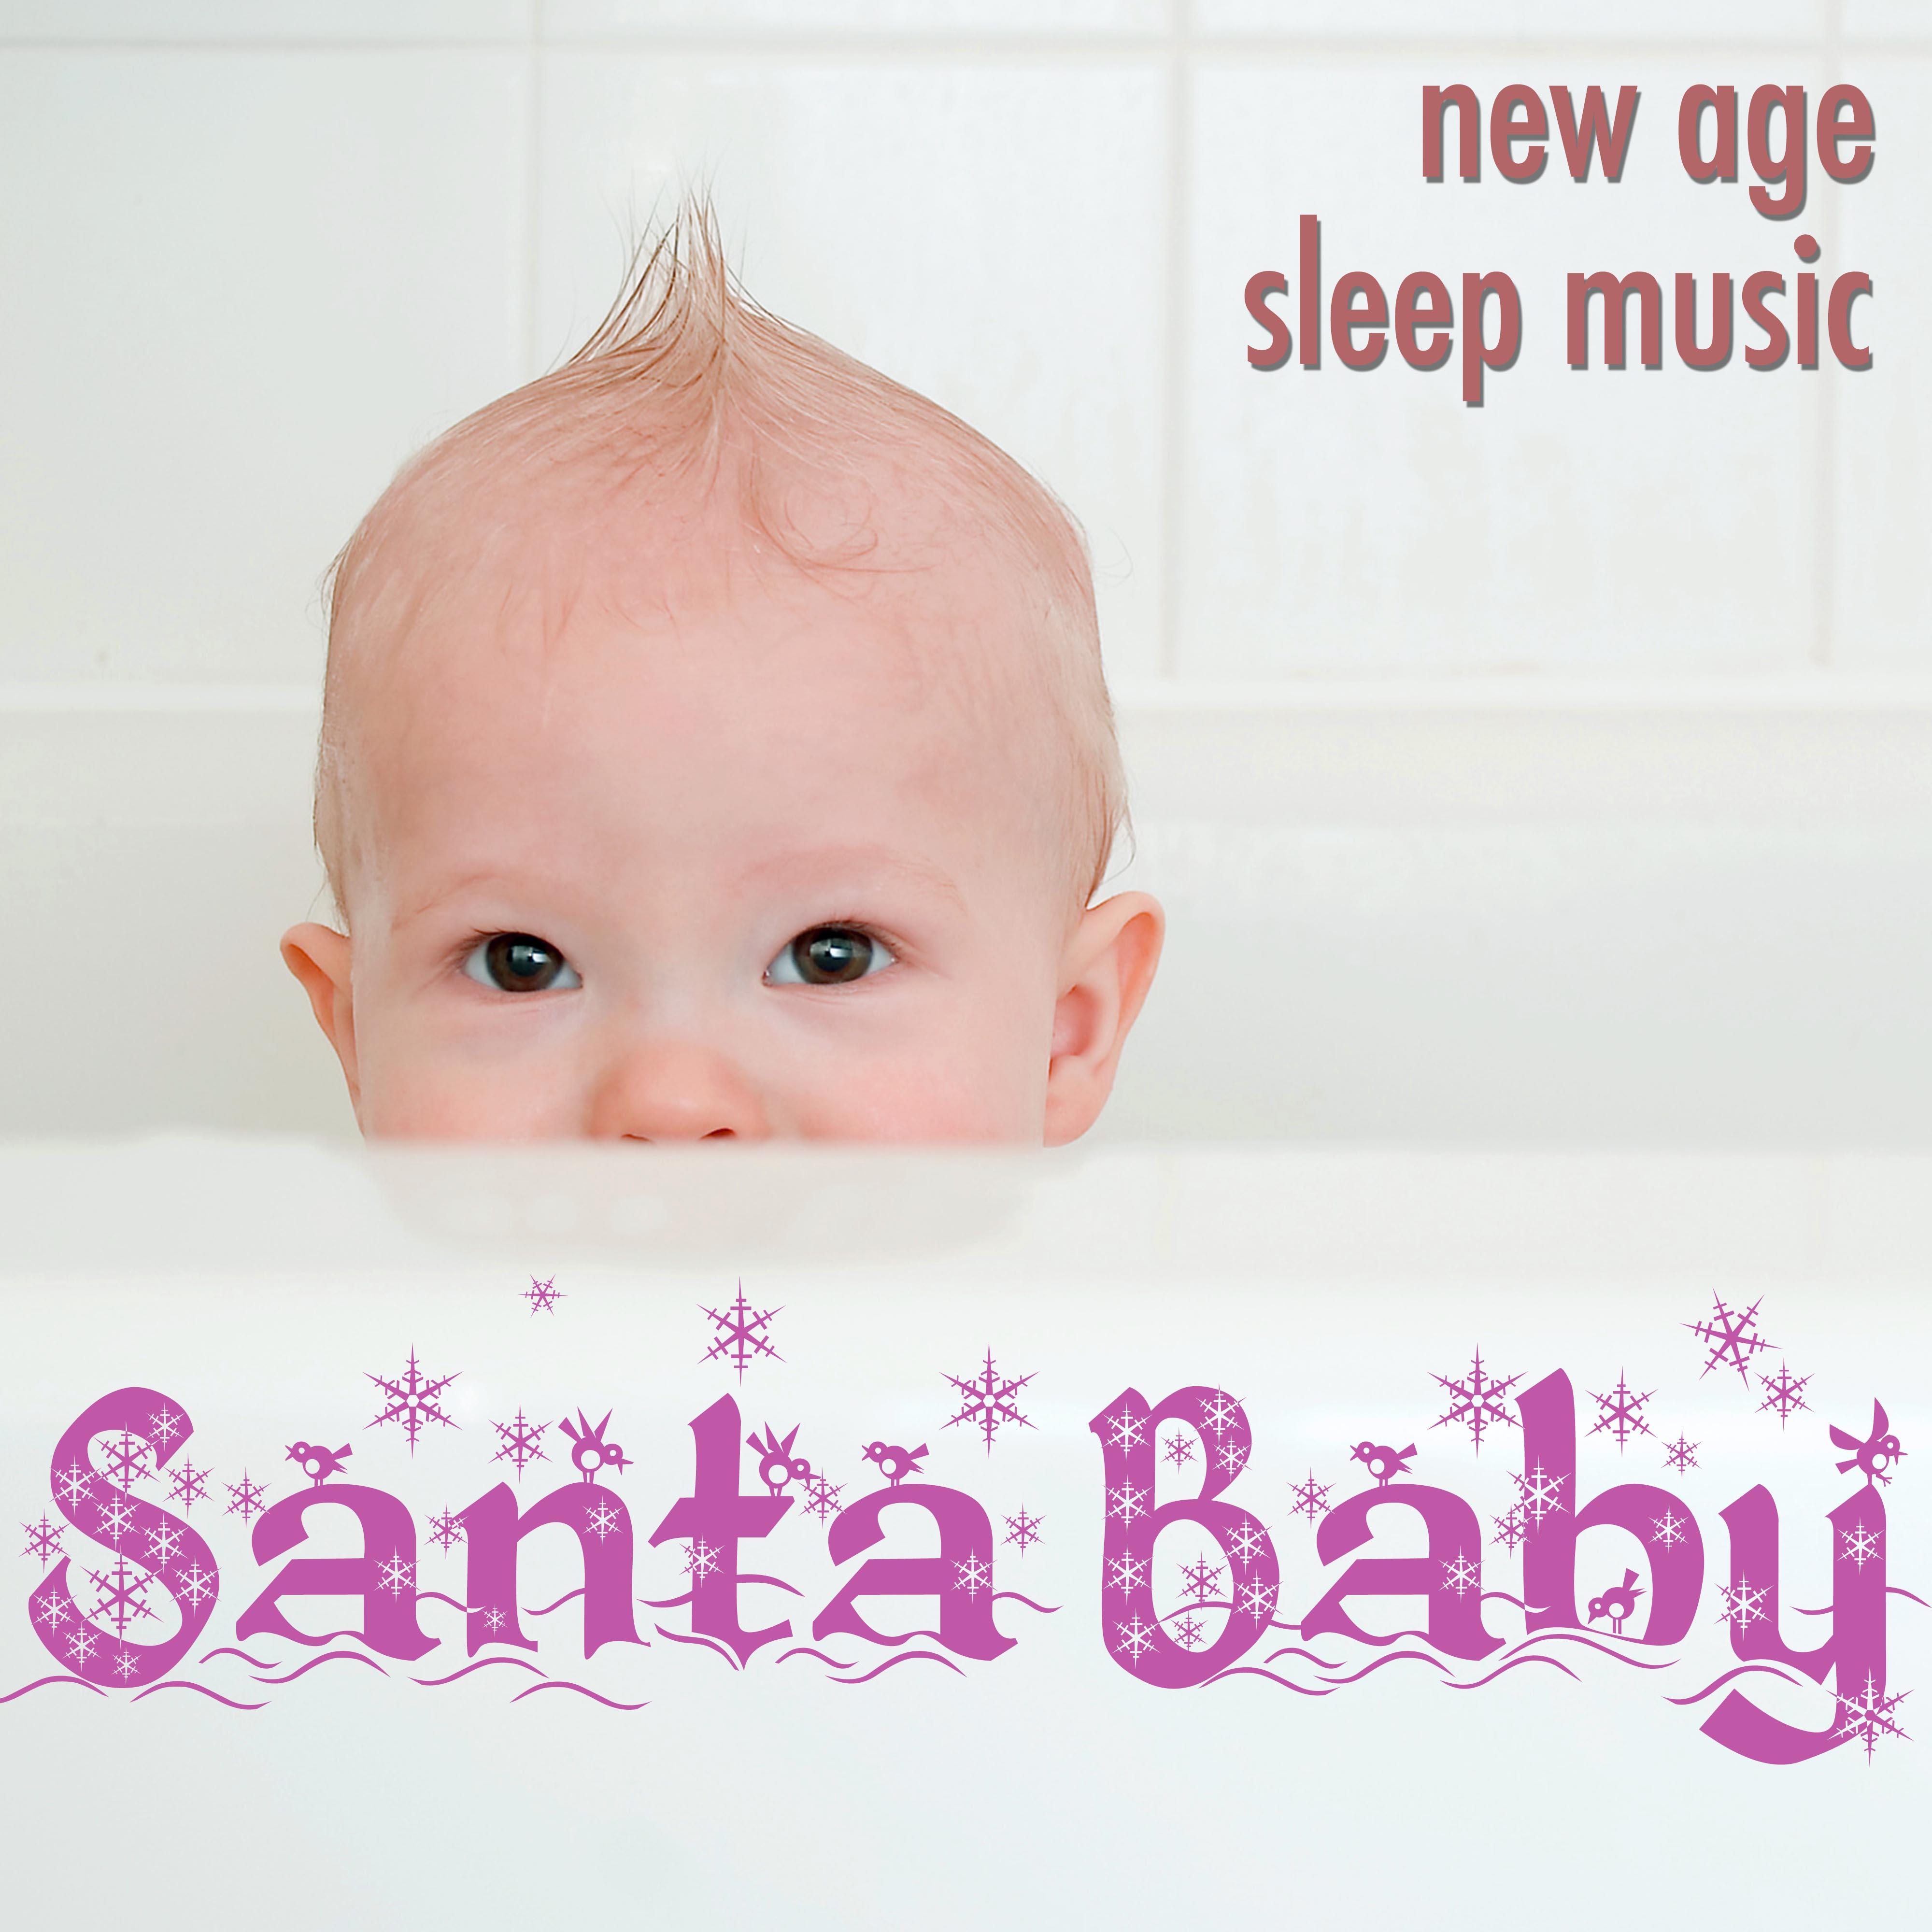 Santa Baby: Fall Asleep Faster and Sleep More Soundly with these New Age Carols for Christmas Time